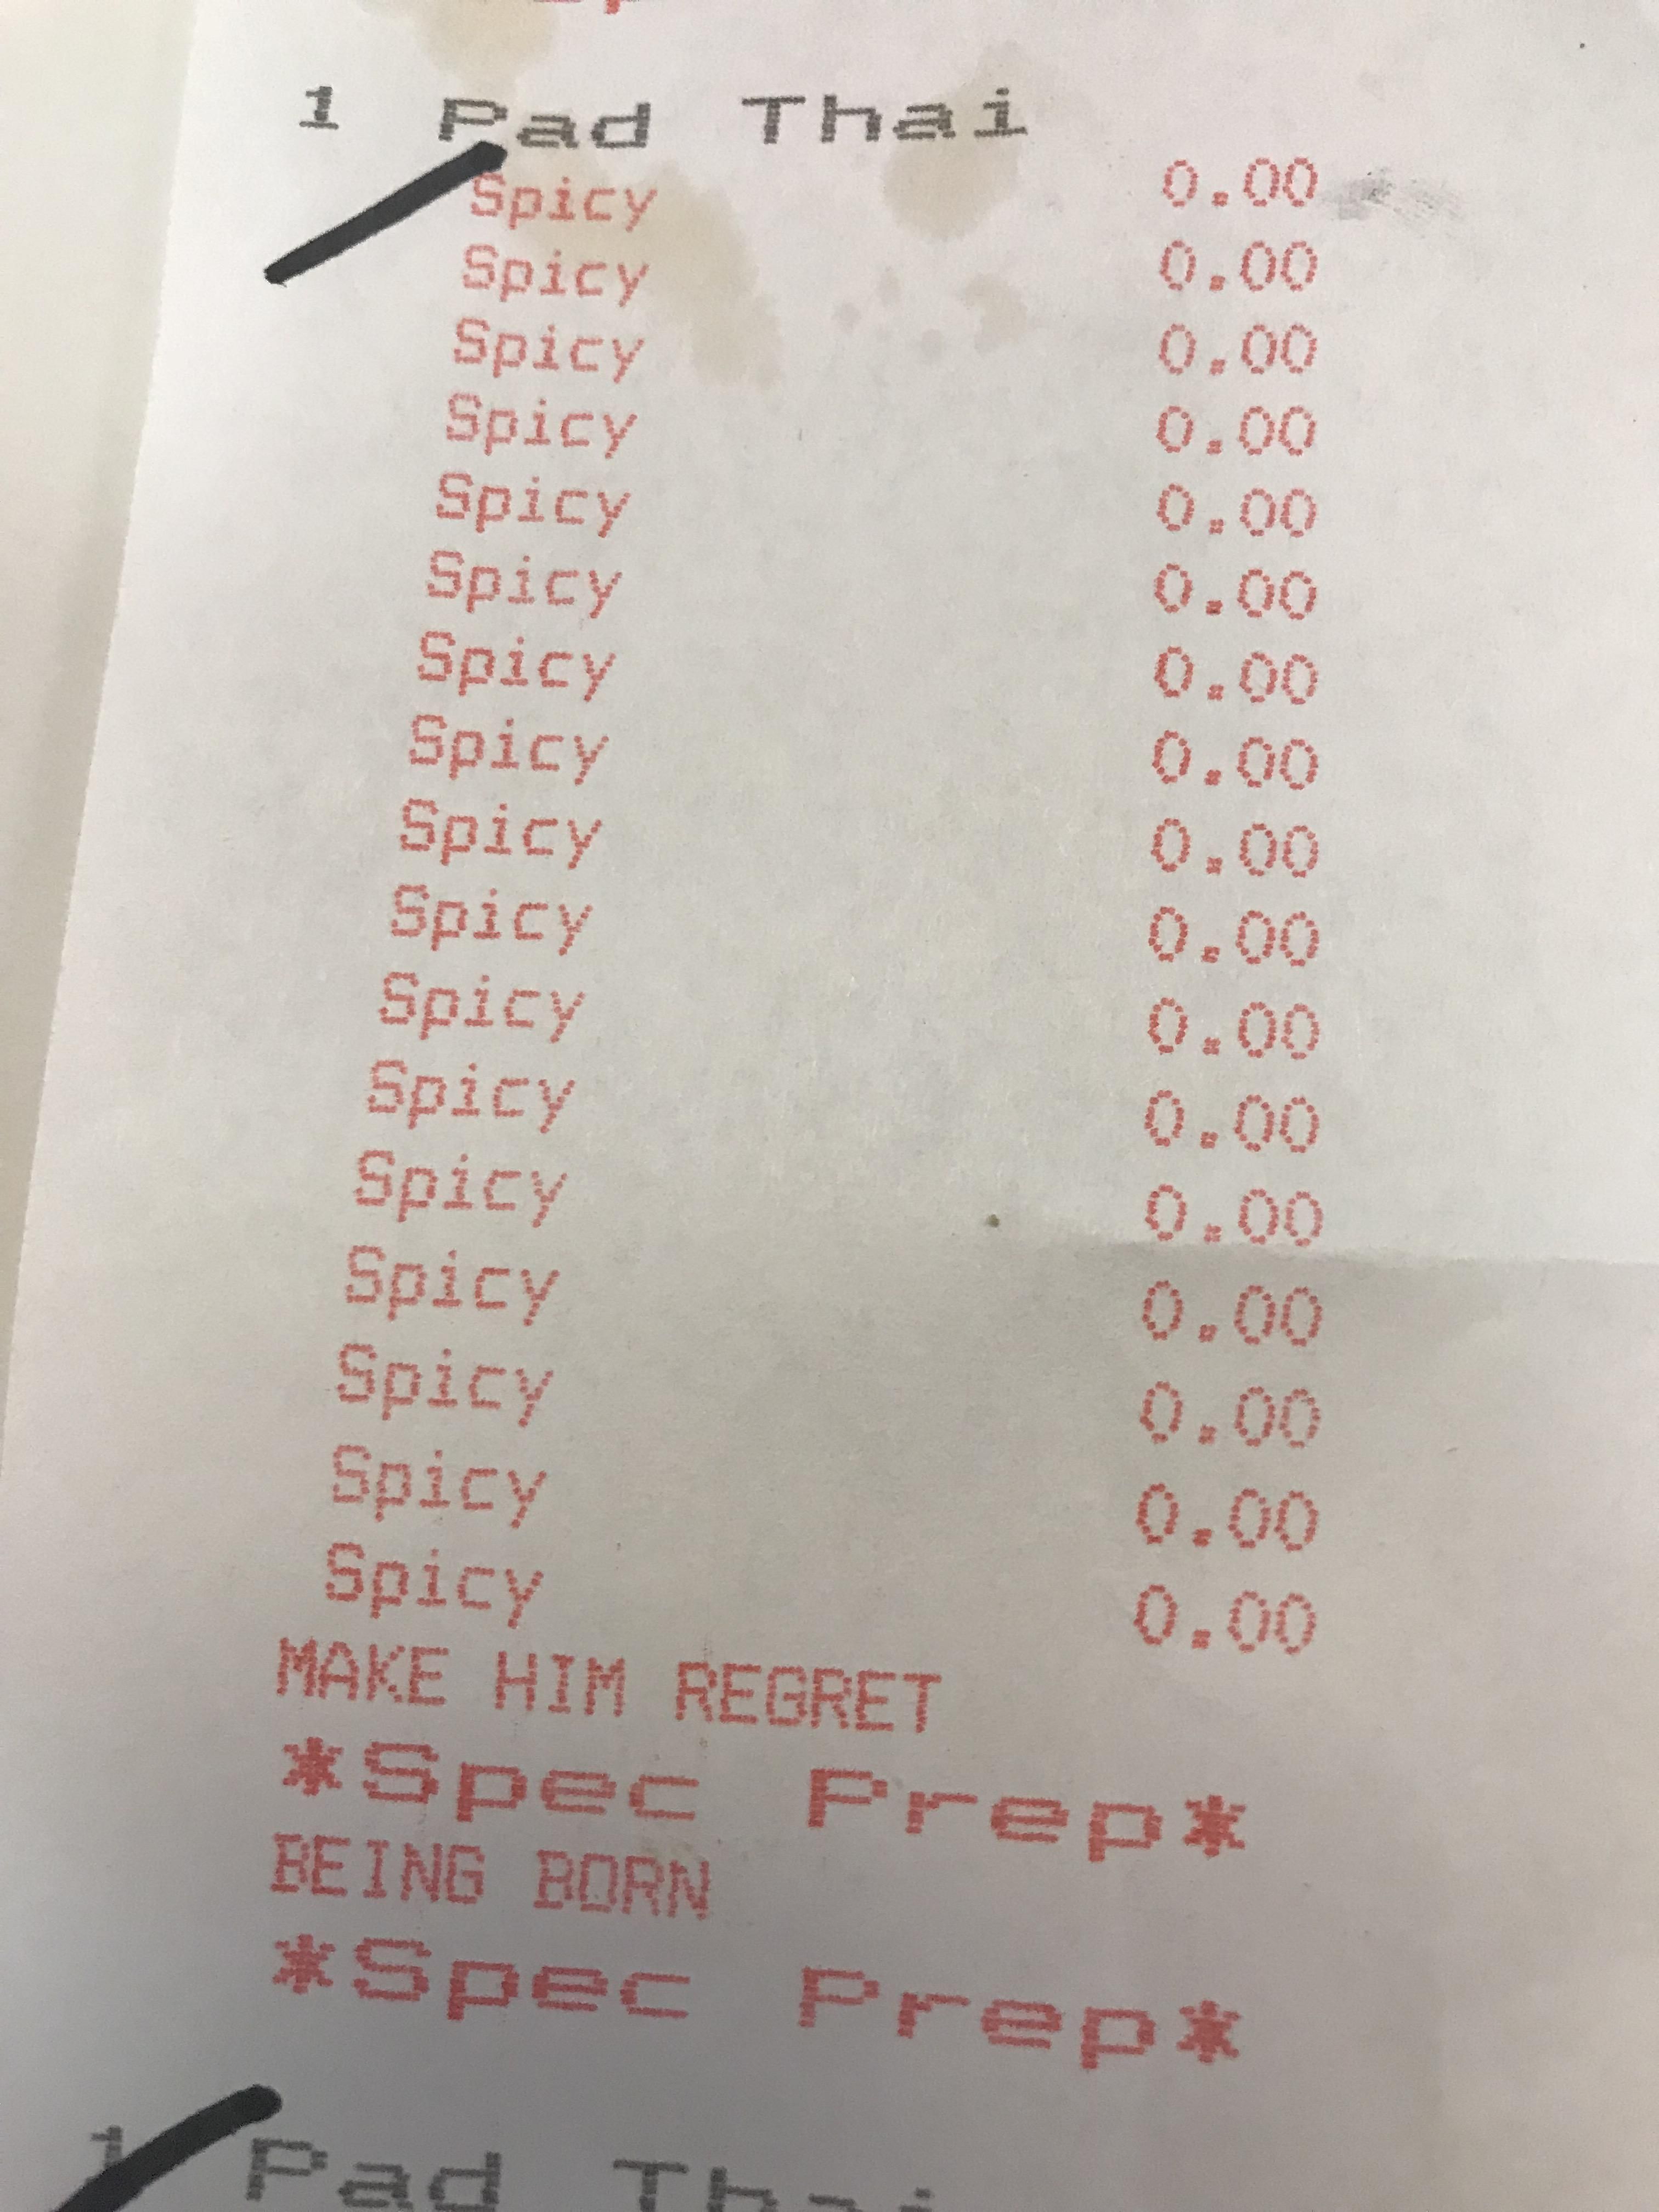 He asked for extra spicy pad thai